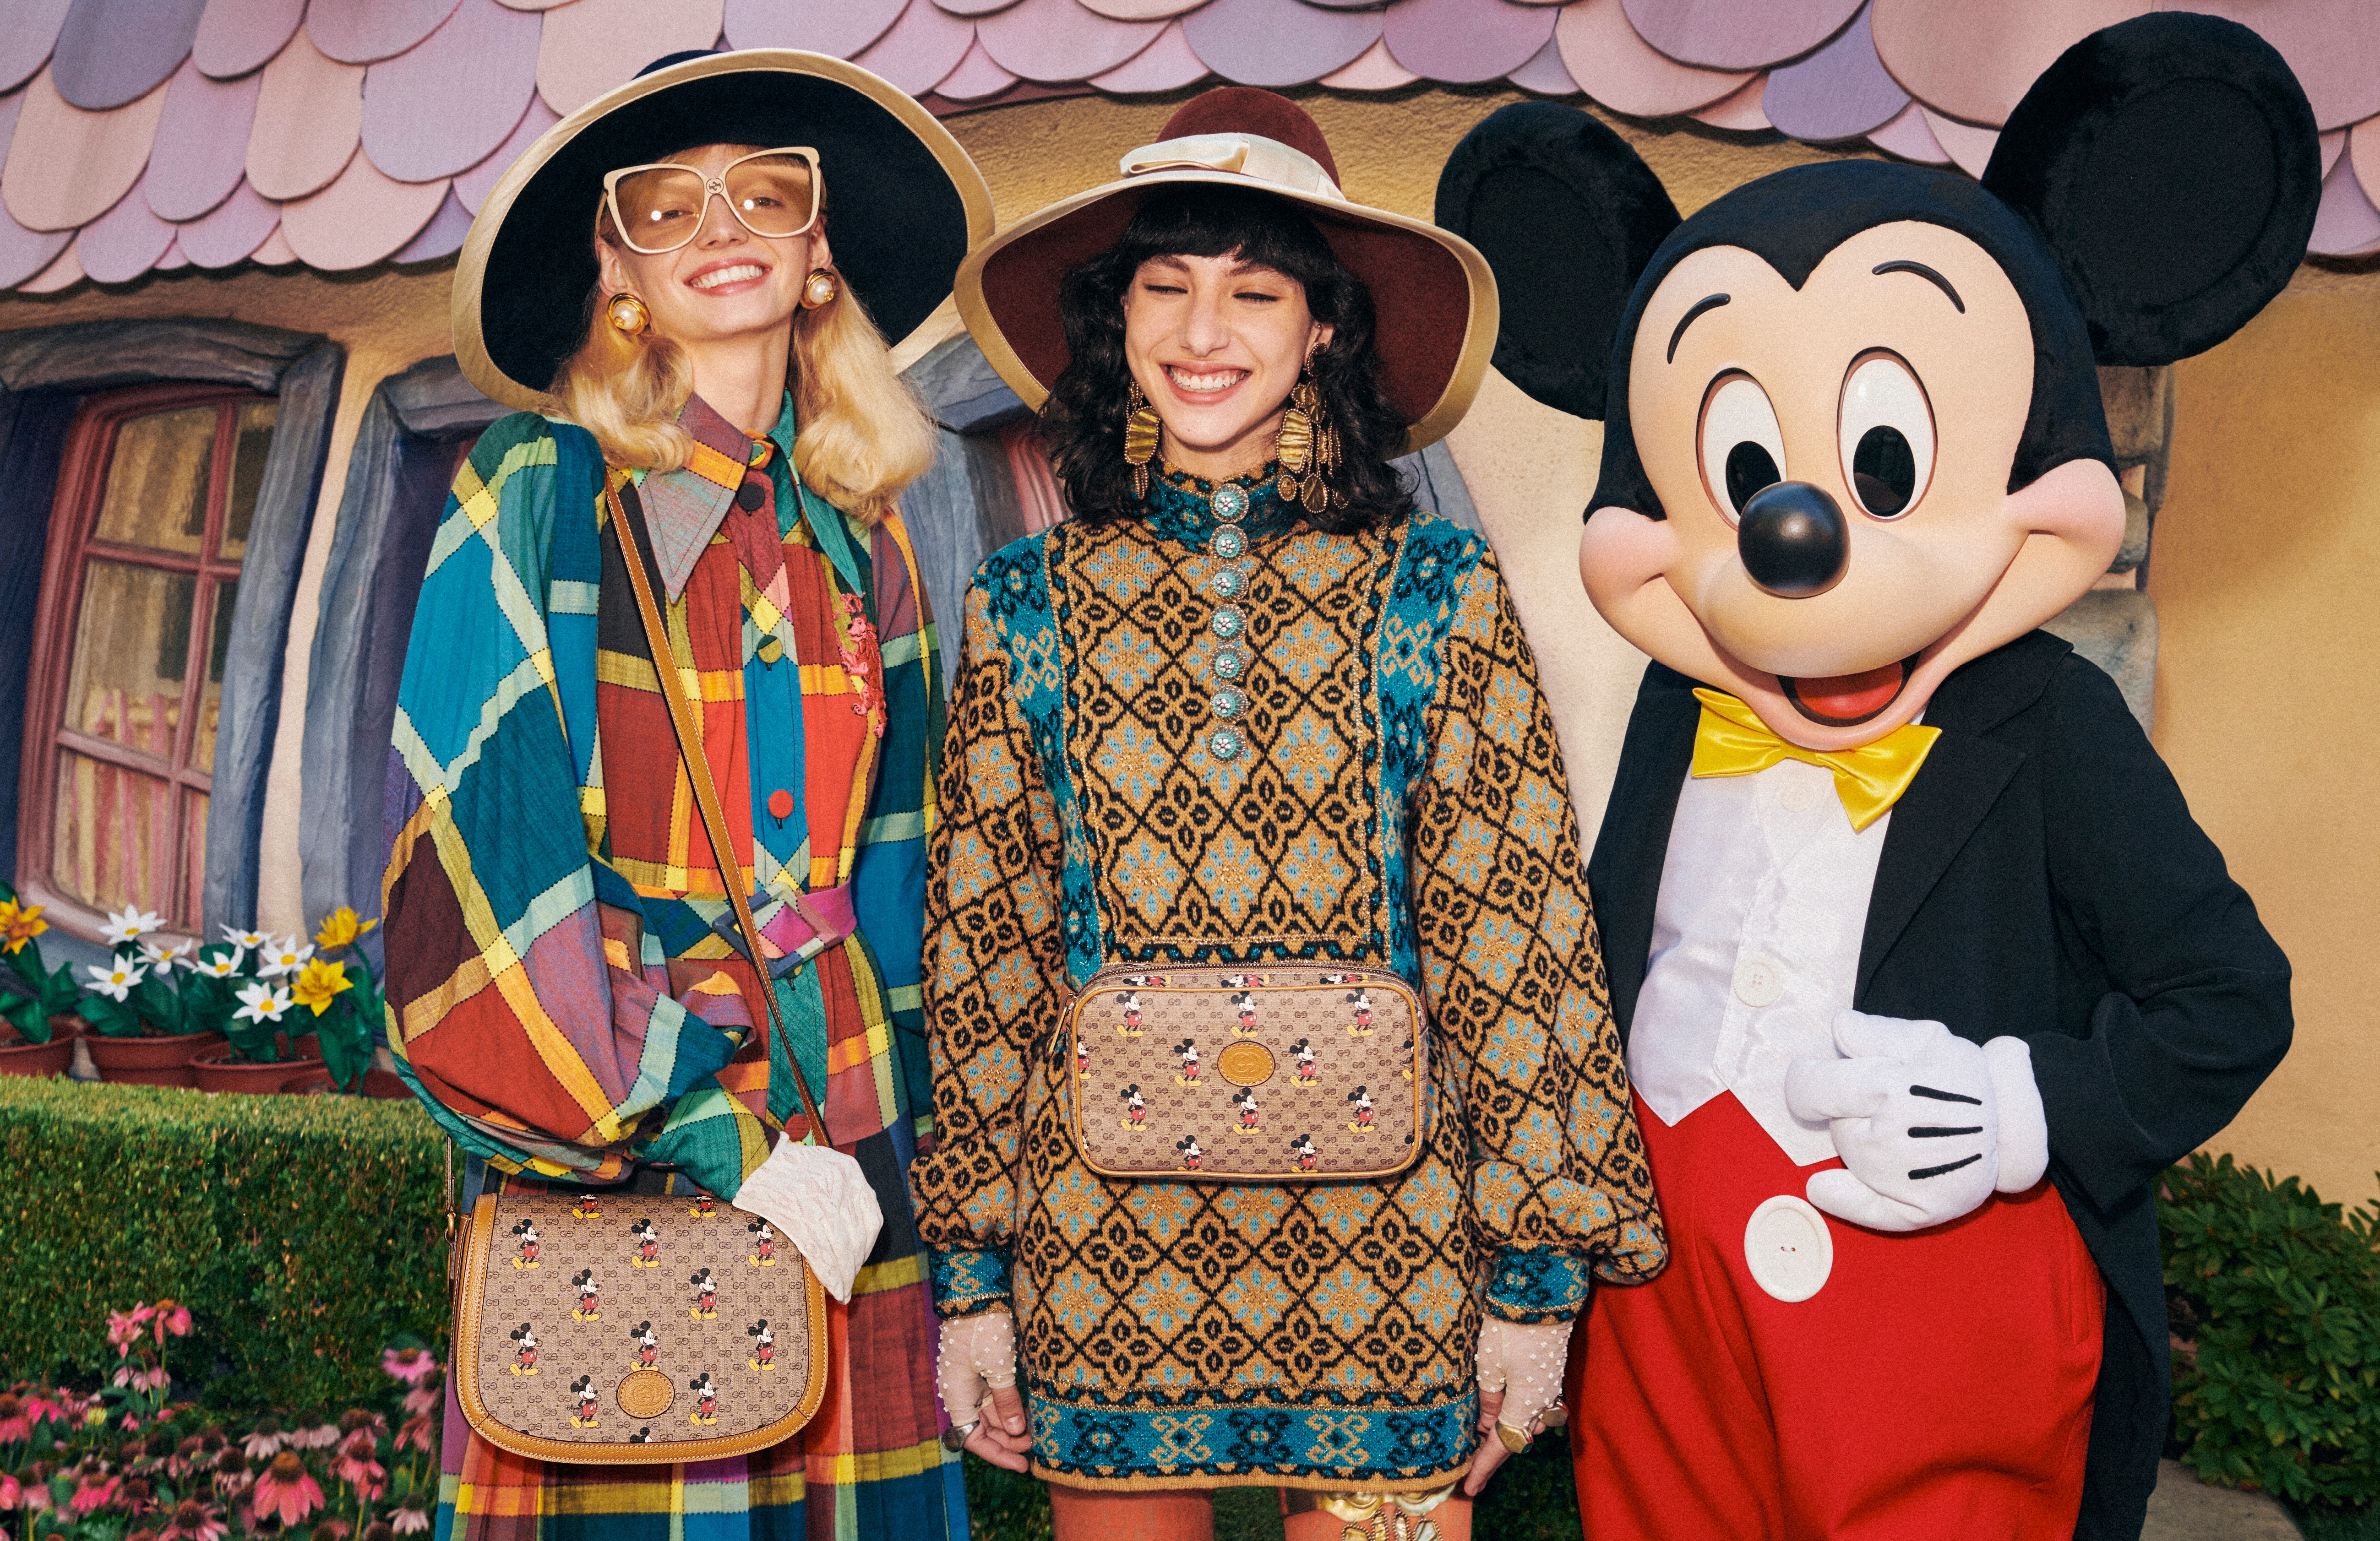 Feeling nostalgic? Check out Gucci’s vintage collection with Mickey Mouse and other brands' exclusive cartoon collaborations for a retro touch. Photo: Gucci